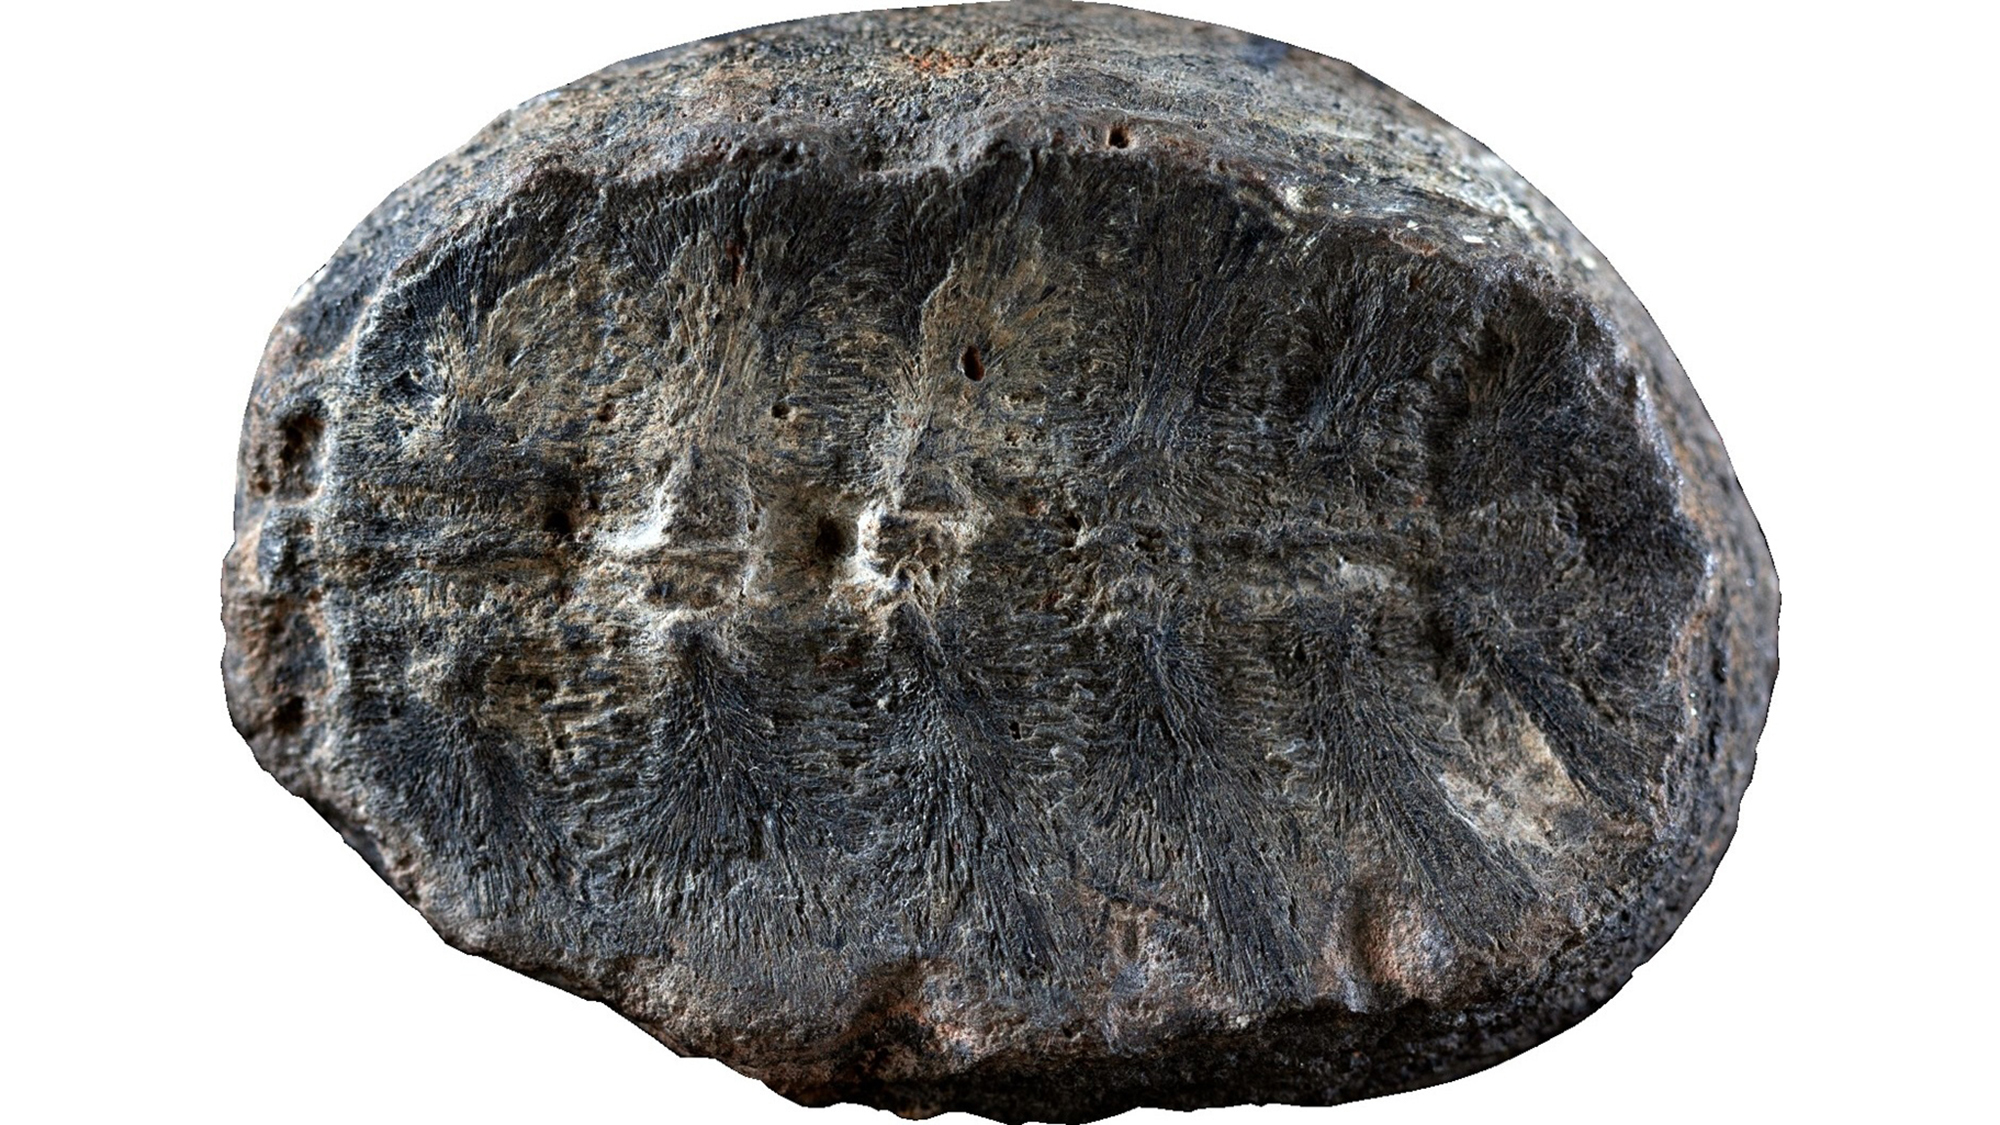 Fossil first identified as plant is actually a baby turtle